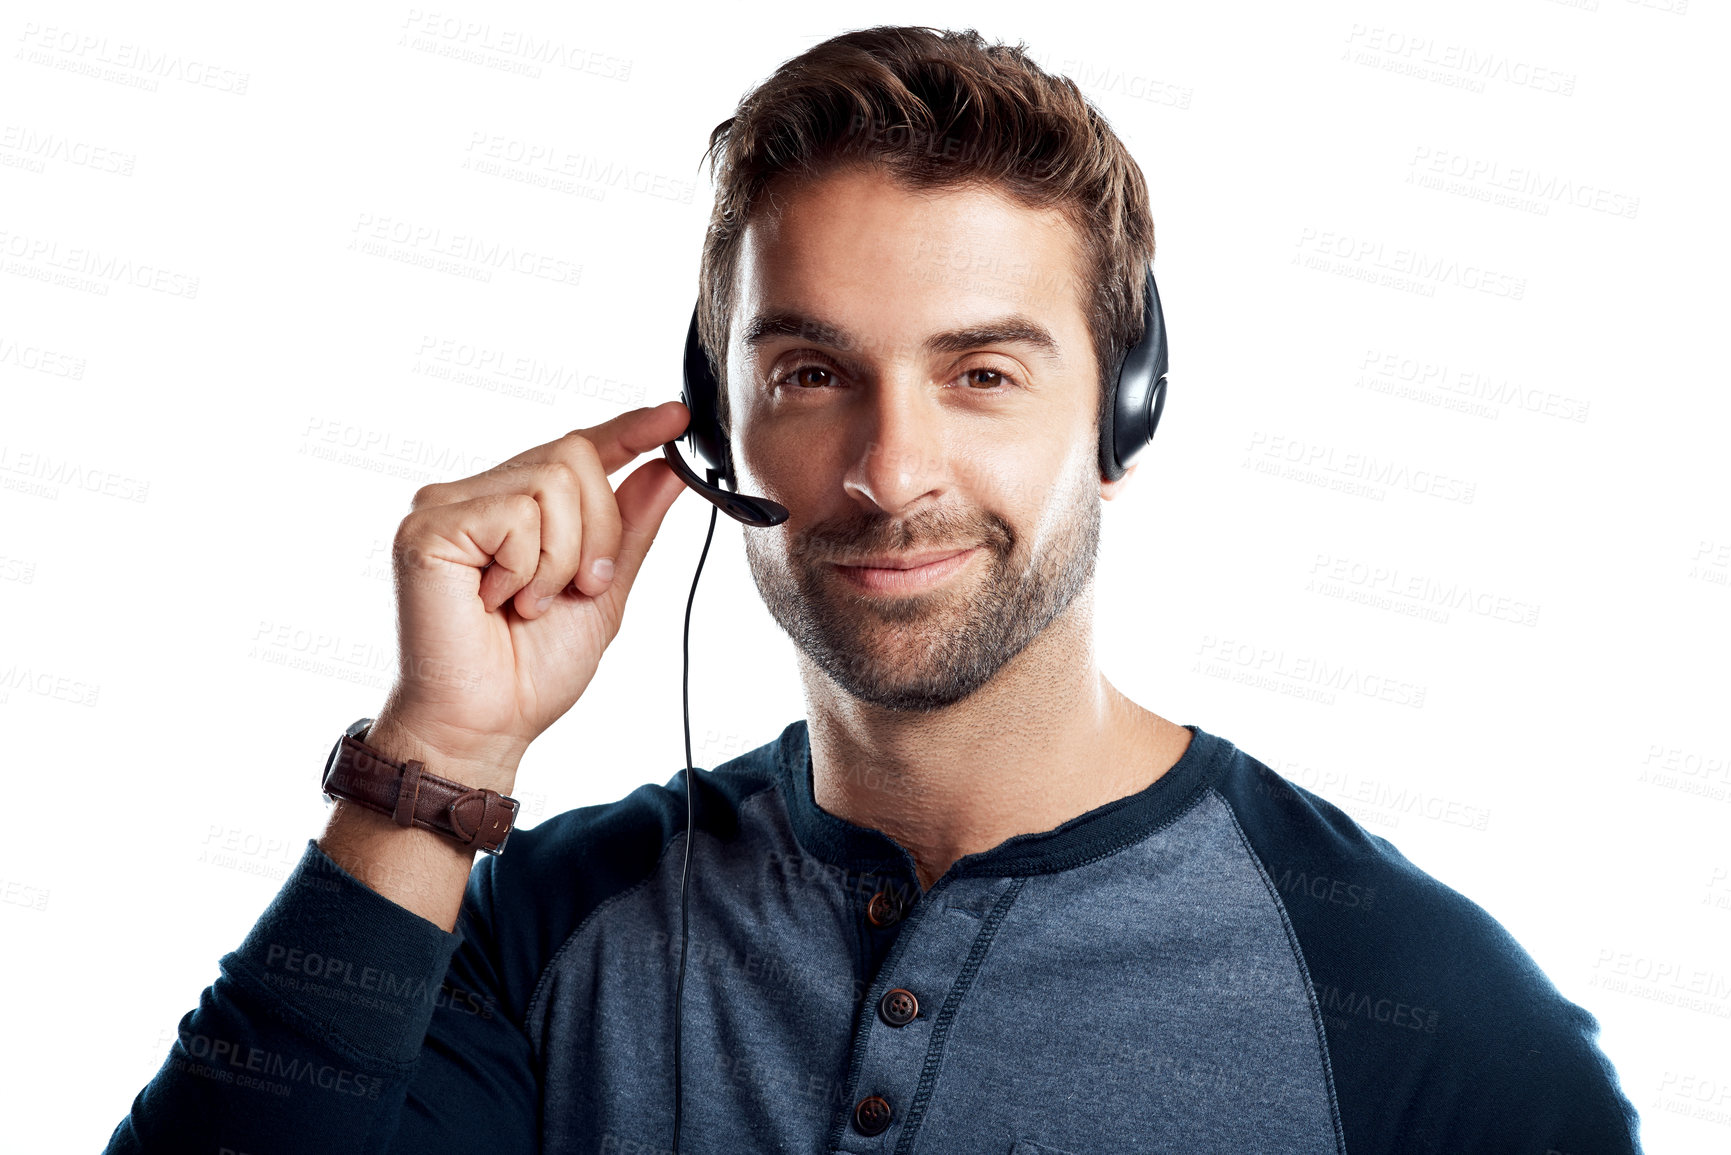 Buy stock photo Studio portrait of a handsome young man using a headset against a white background